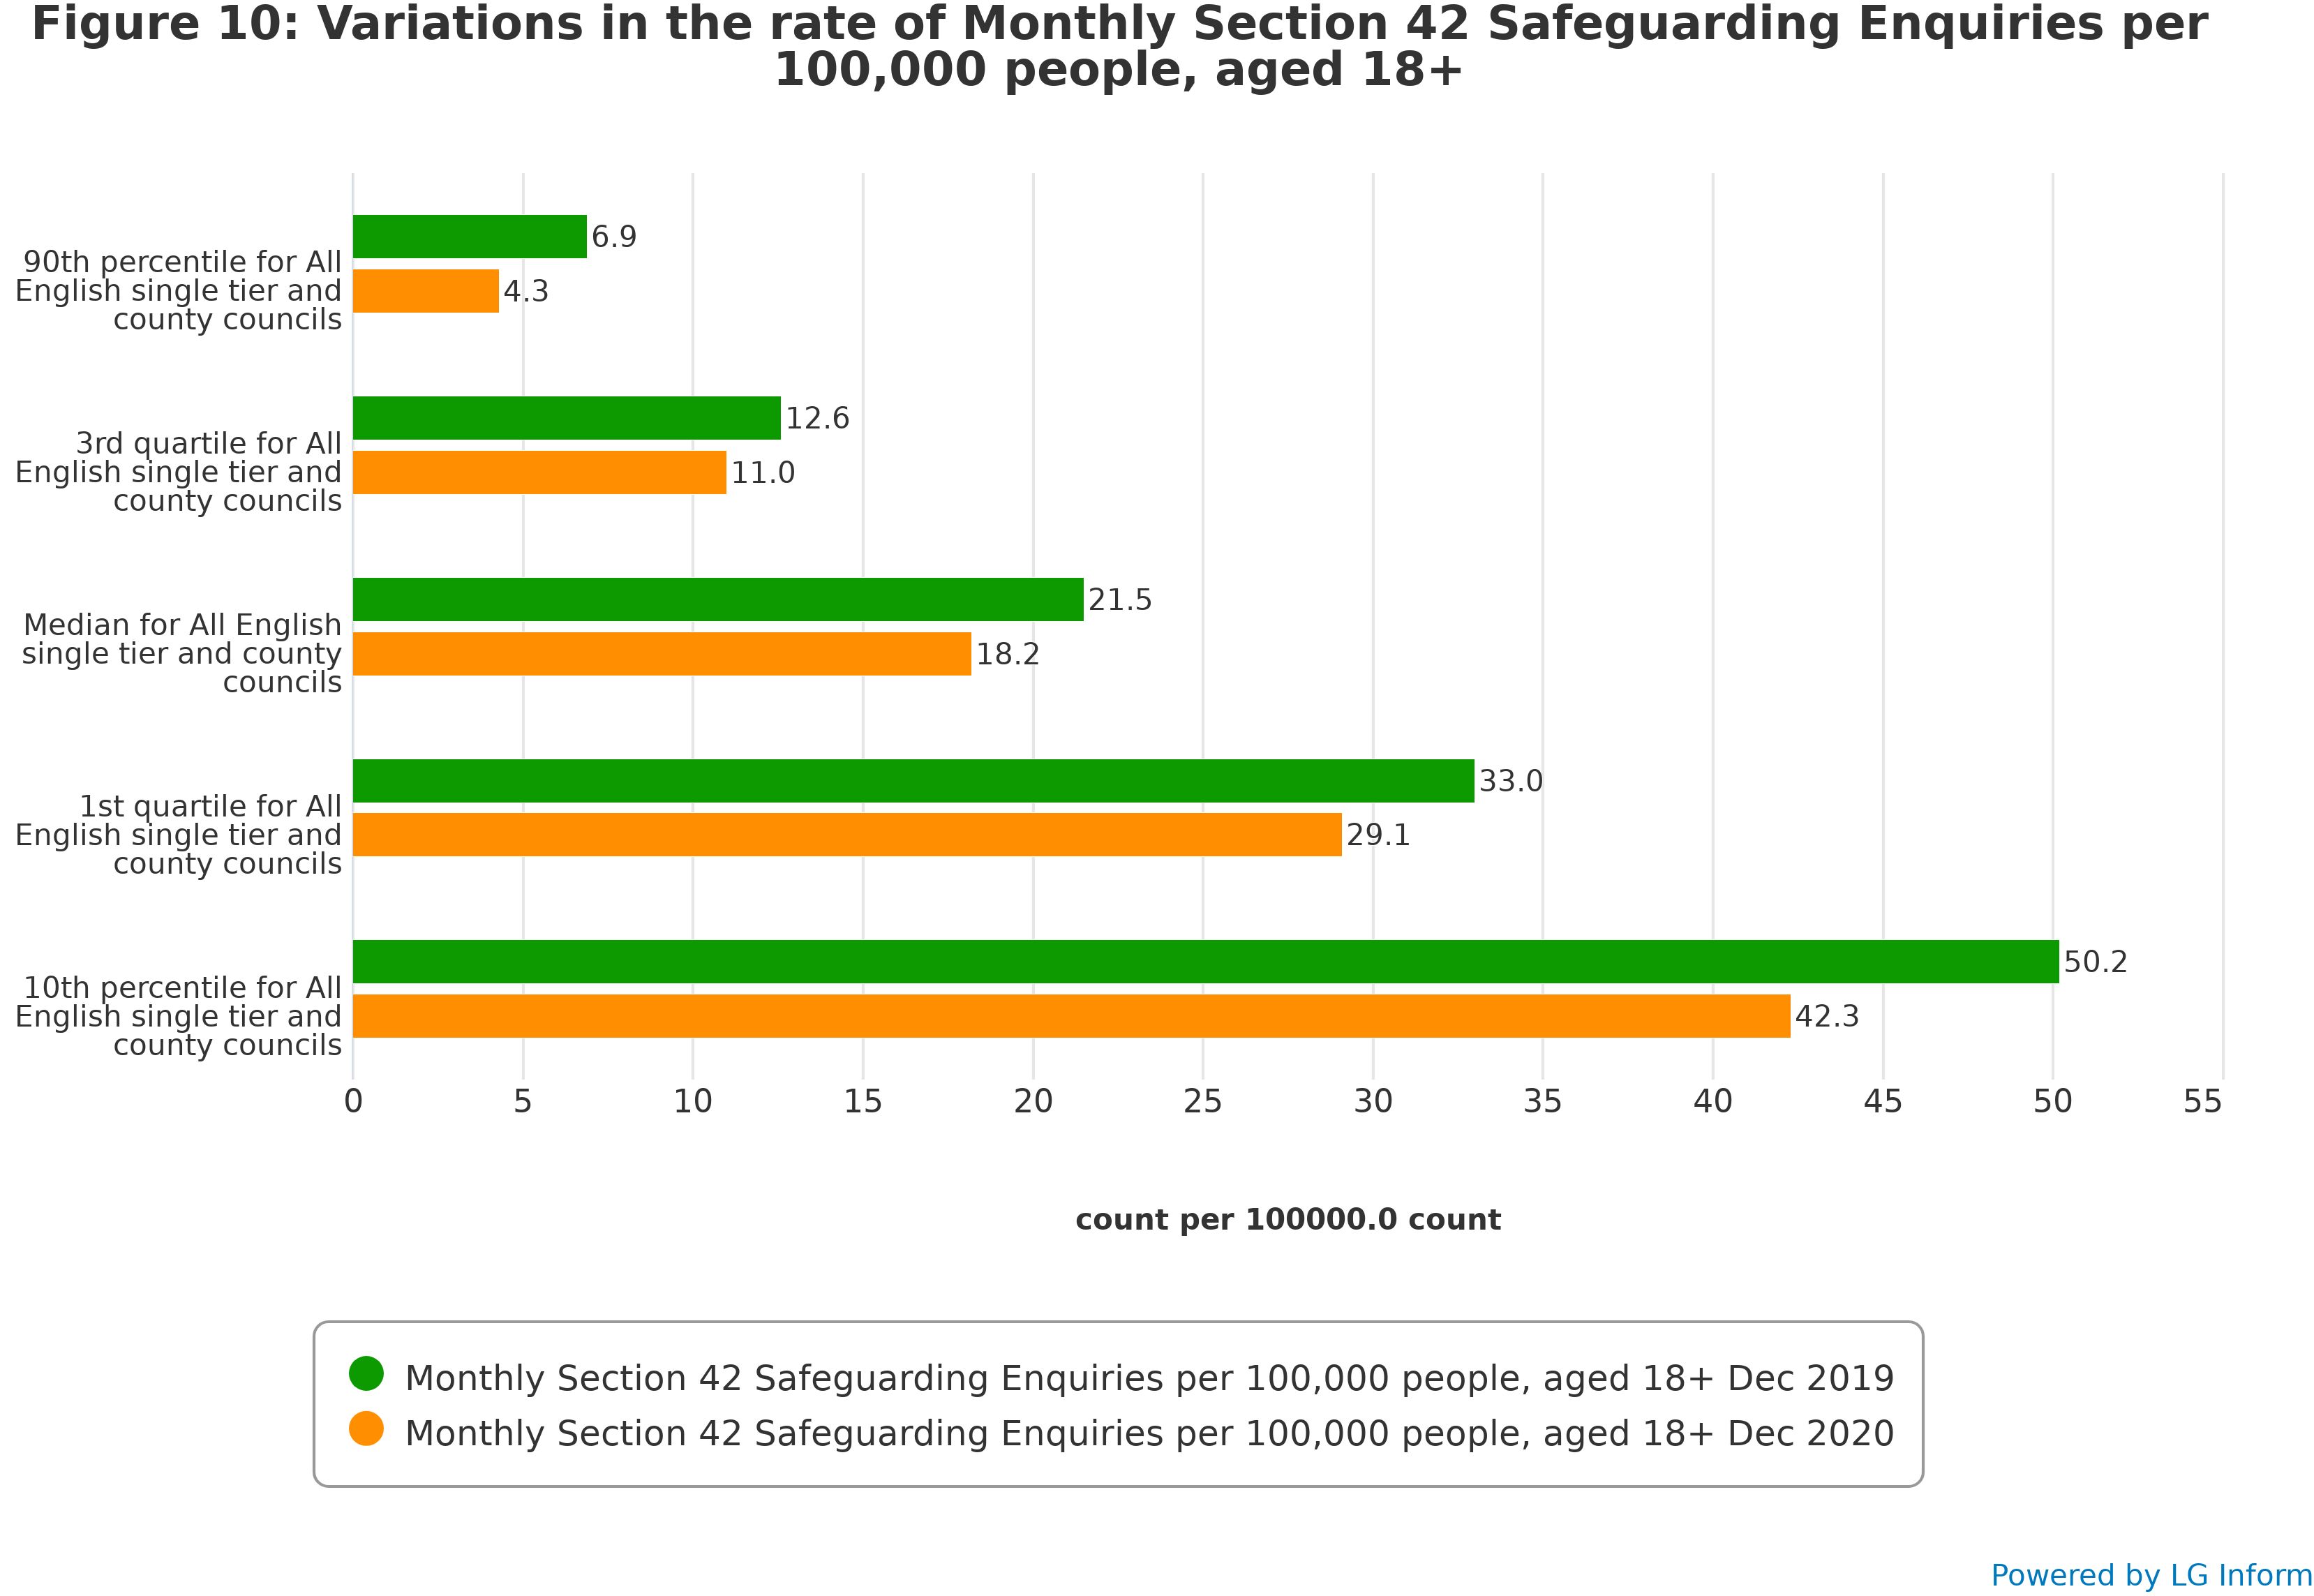 Figure 10: Variations in the rate of Monthly Section 42 Safeguarding Enquiries per 100,000 people, aged 18+